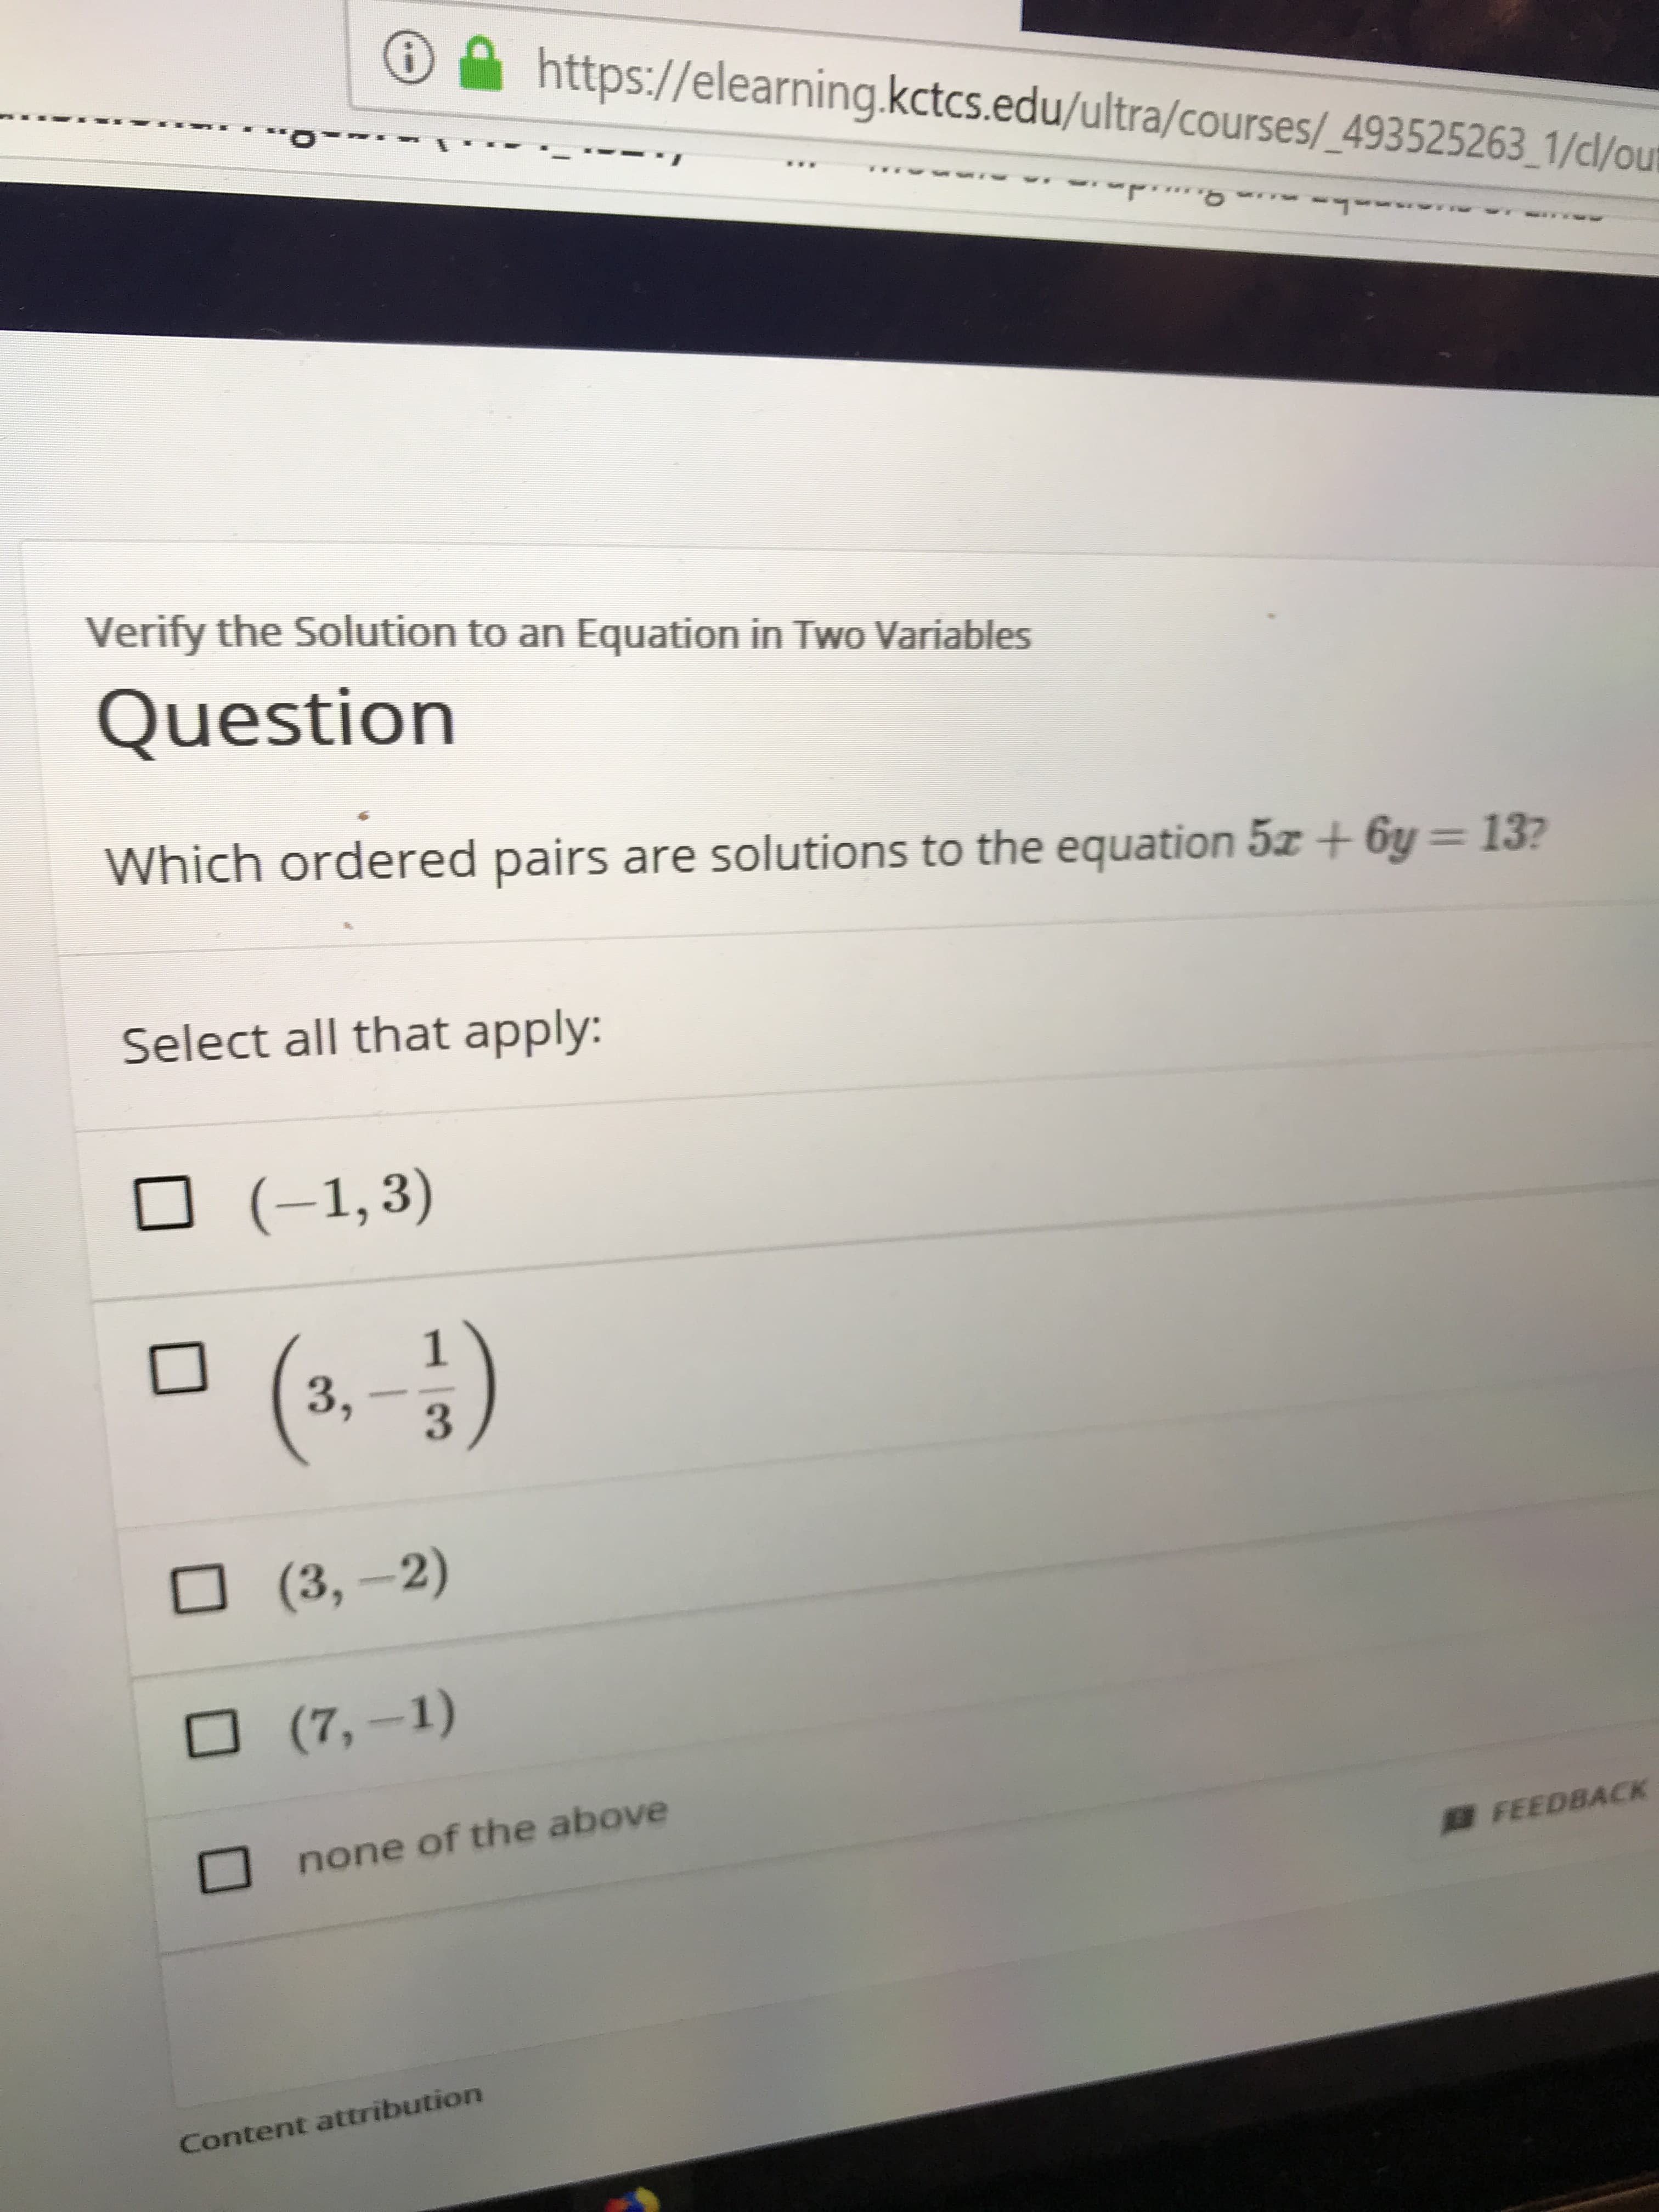 https://elearning.kctcs.edu/ultra/courses/_493525263_1/dl/oum
Verify the Solution to an Equation in Two Variables
Question
Which ordered pairs are solutions to the equation 5z+ 6y = 13?
Select all that apply:
(-1,3)
1
3,
(3,-2)
(7,-1)
none of the above
FEEDBACK
Content attribution
|3
